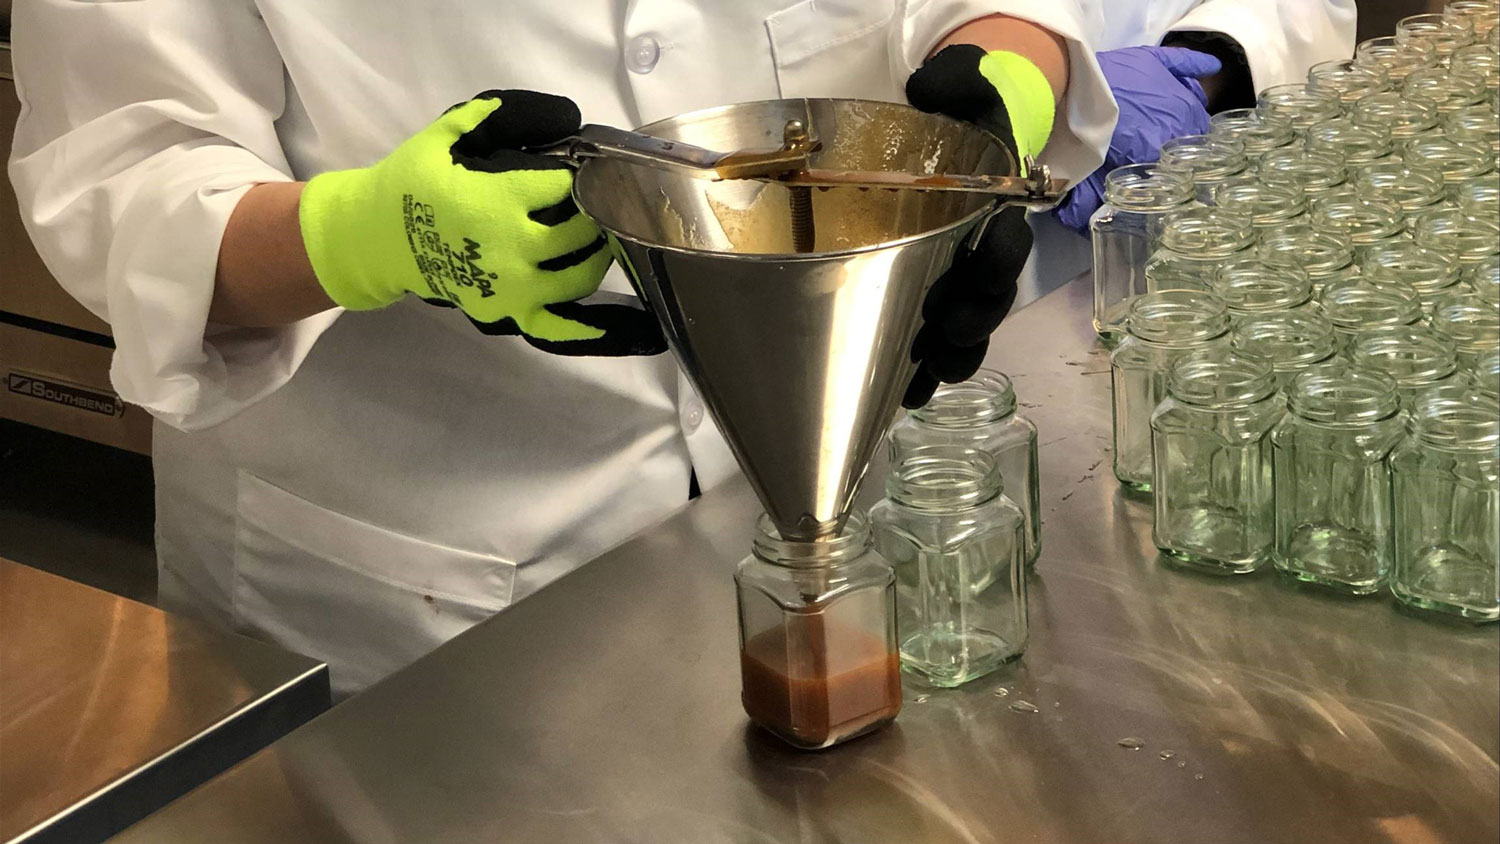 Caramel sauce being poured into glass jars.